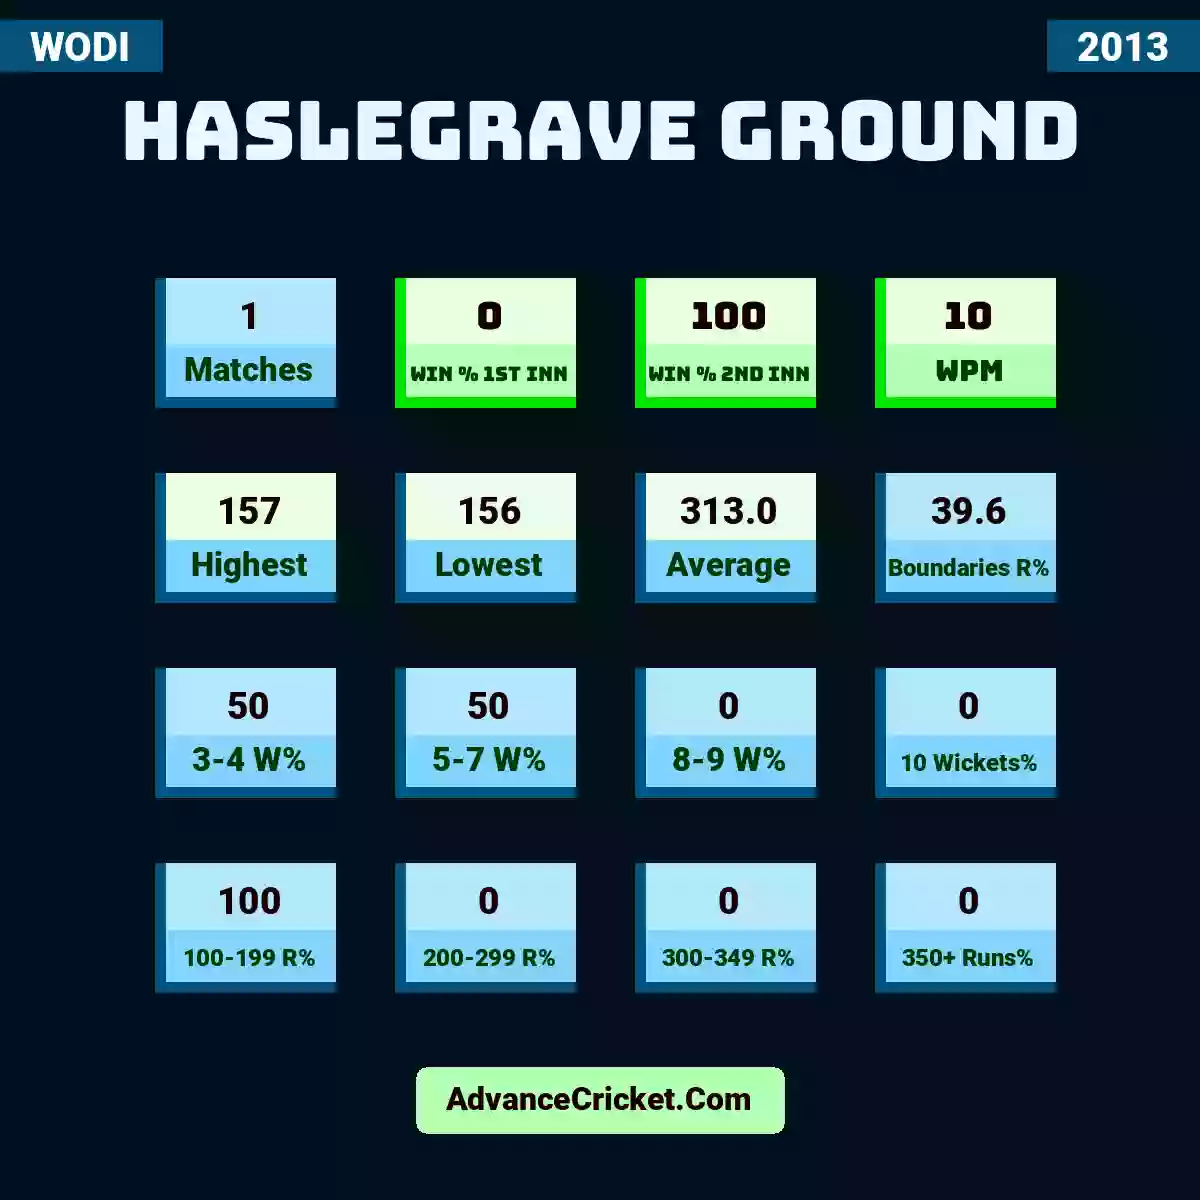 Image showing Haslegrave Ground with Matches: 1, Win % 1st Inn: 0, Win % 2nd Inn: 100, WPM: 10, Highest: 157, Lowest: 156, Average: 313.0, Boundaries R%: 39.6, 3-4 W%: 50, 5-7 W%: 50, 8-9 W%: 0, 10 Wickets%: 0, 100-199 R%: 100, 200-299 R%: 0, 300-349 R%: 0, 350+ Runs%: 0.